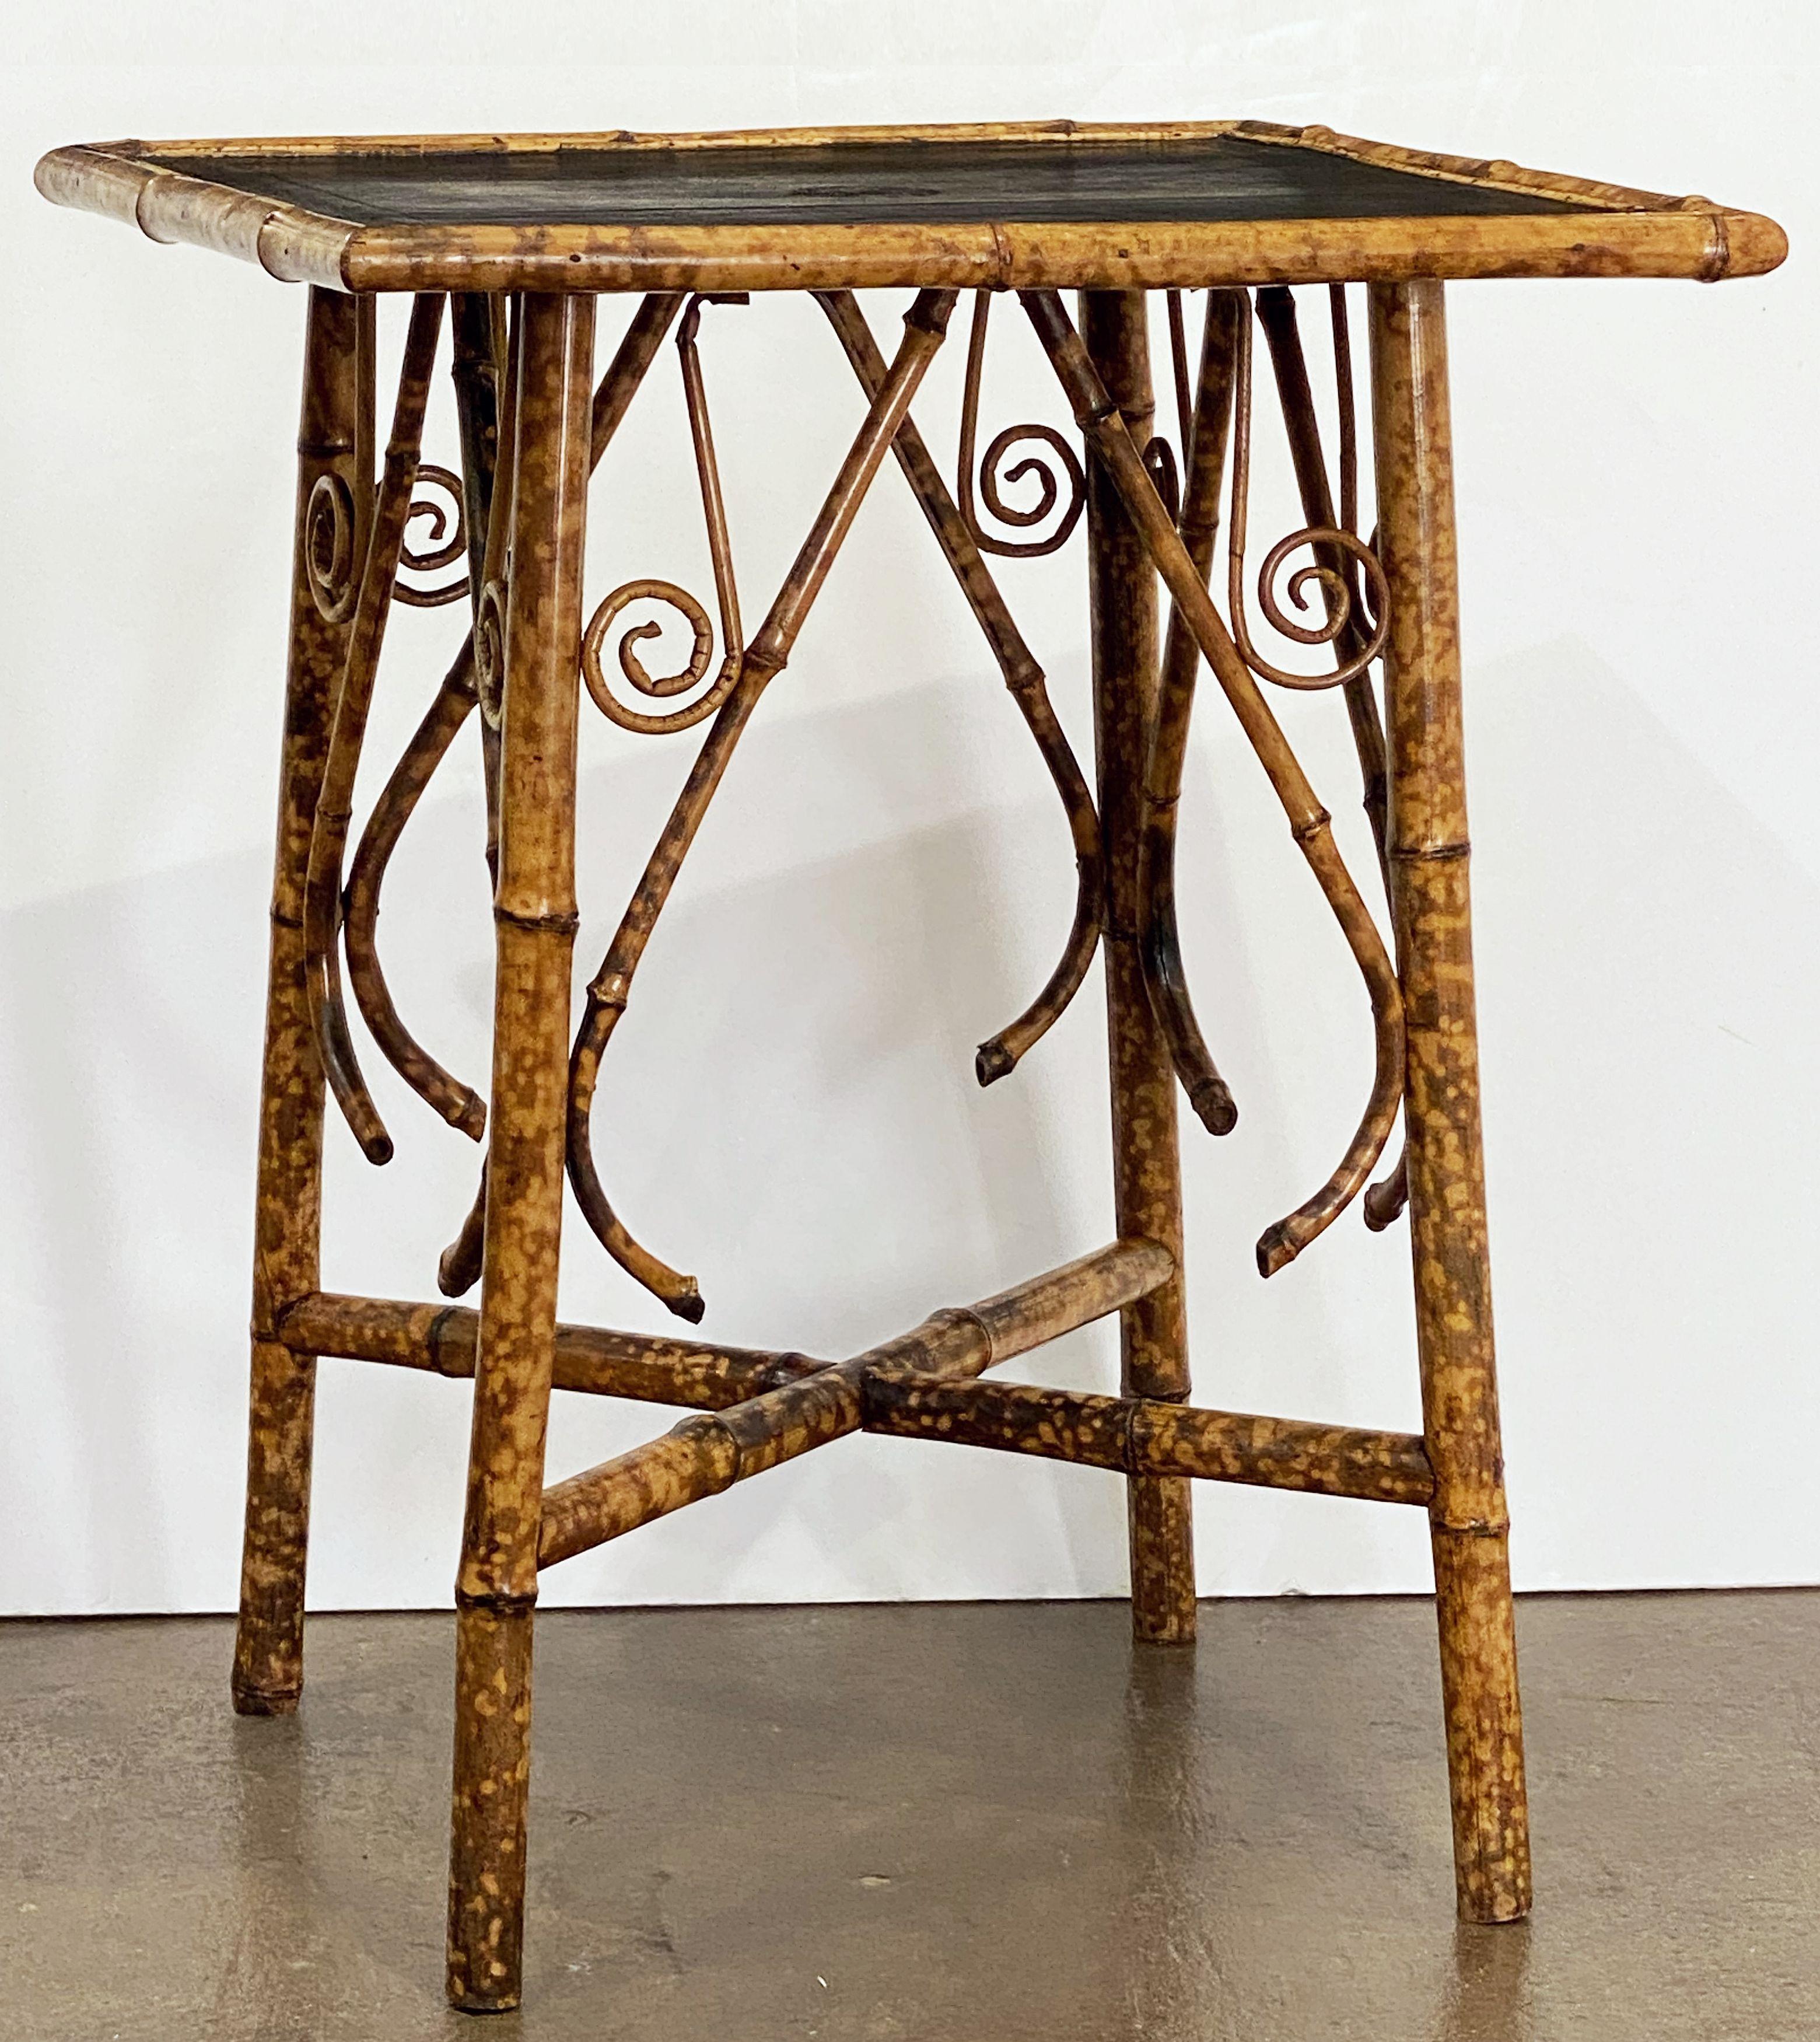 A fine English bamboo table from the Aesthetic Movement period, c.1870-1910, featuring a square top with embossed leather and bamboo accents over a four-legged stretcher frame of bamboo.